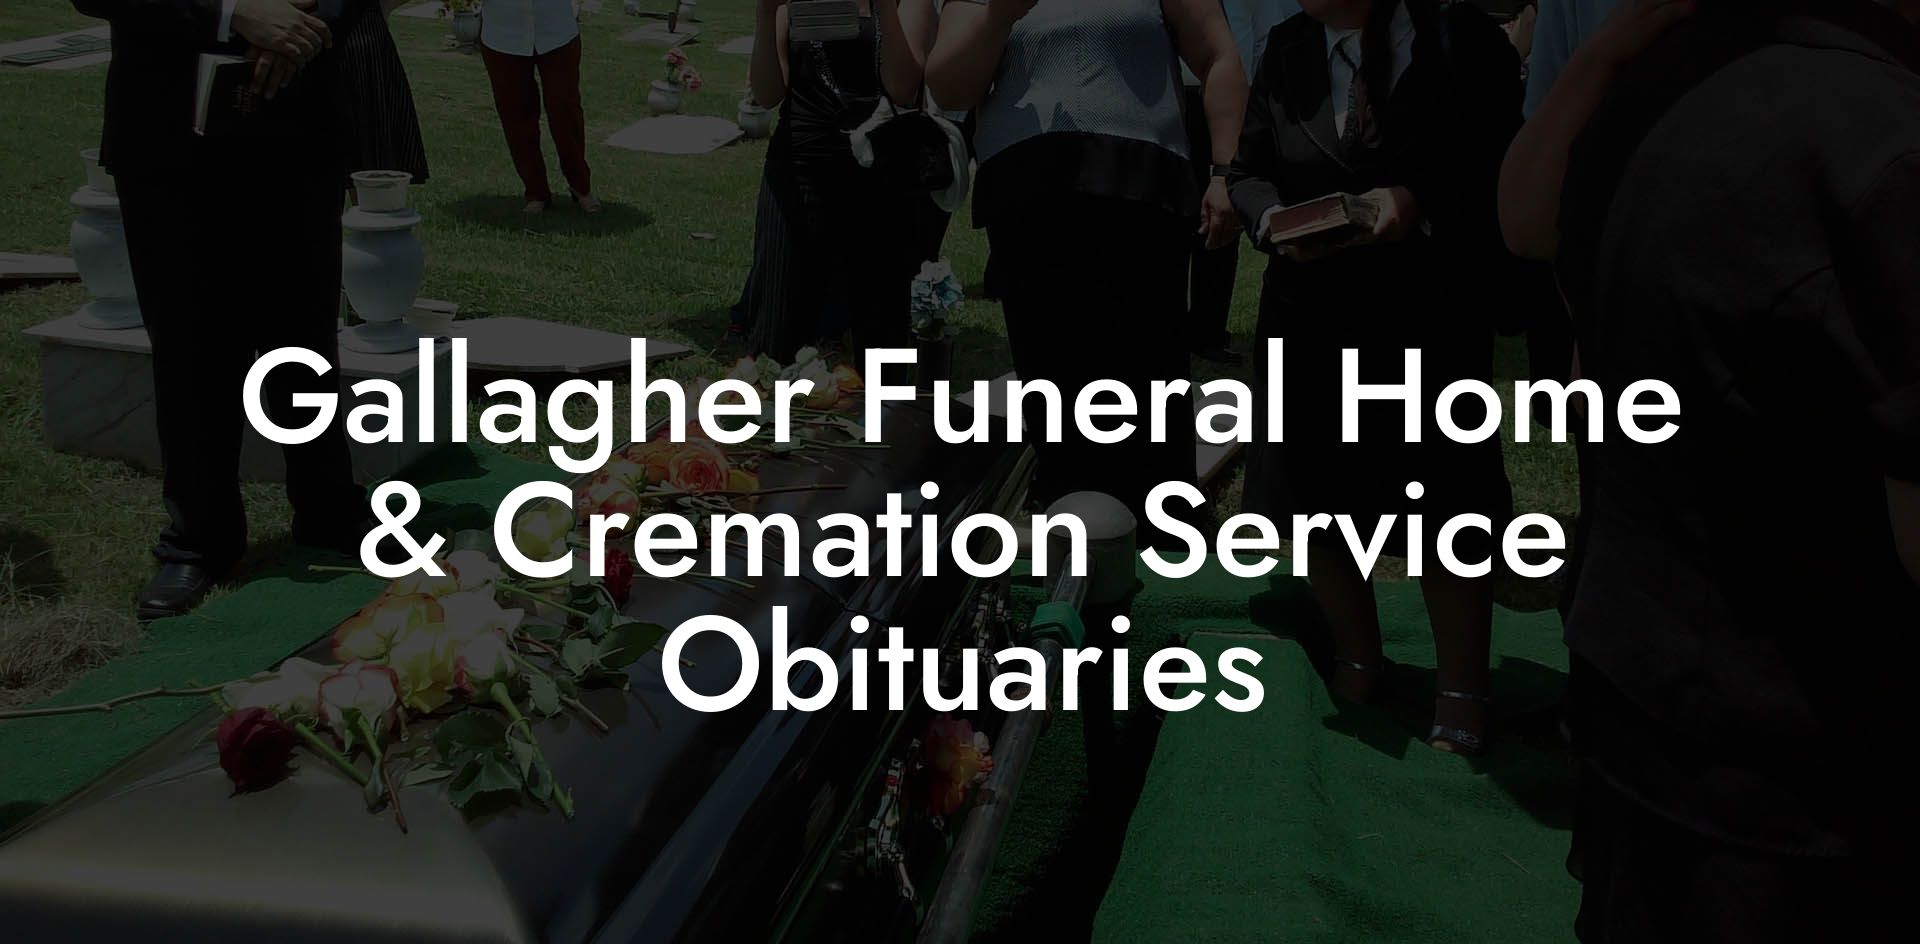 Gallagher Funeral Home & Cremation Service Obituaries